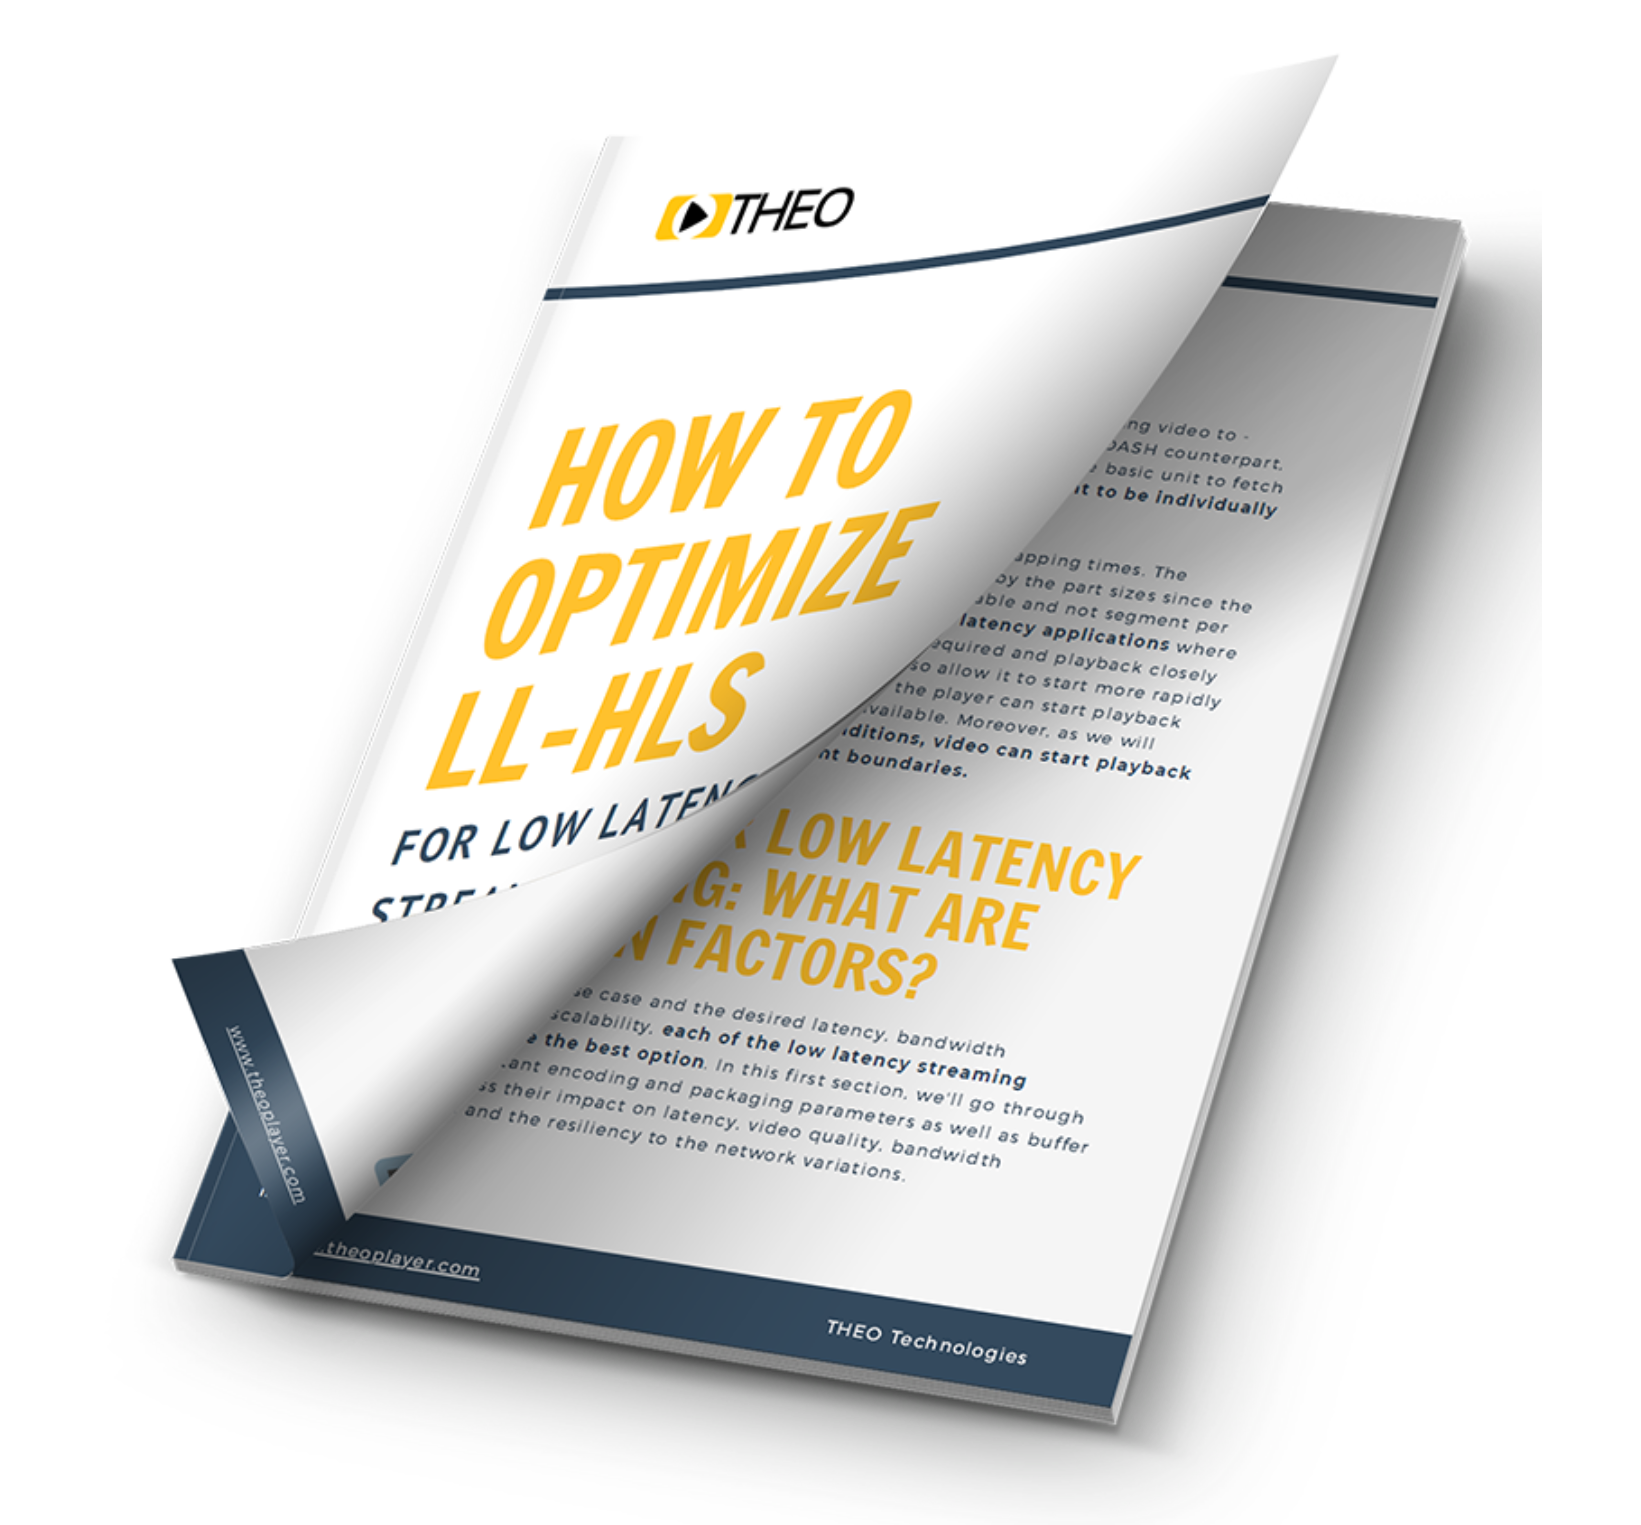 how to optimize ll hls whitepaper